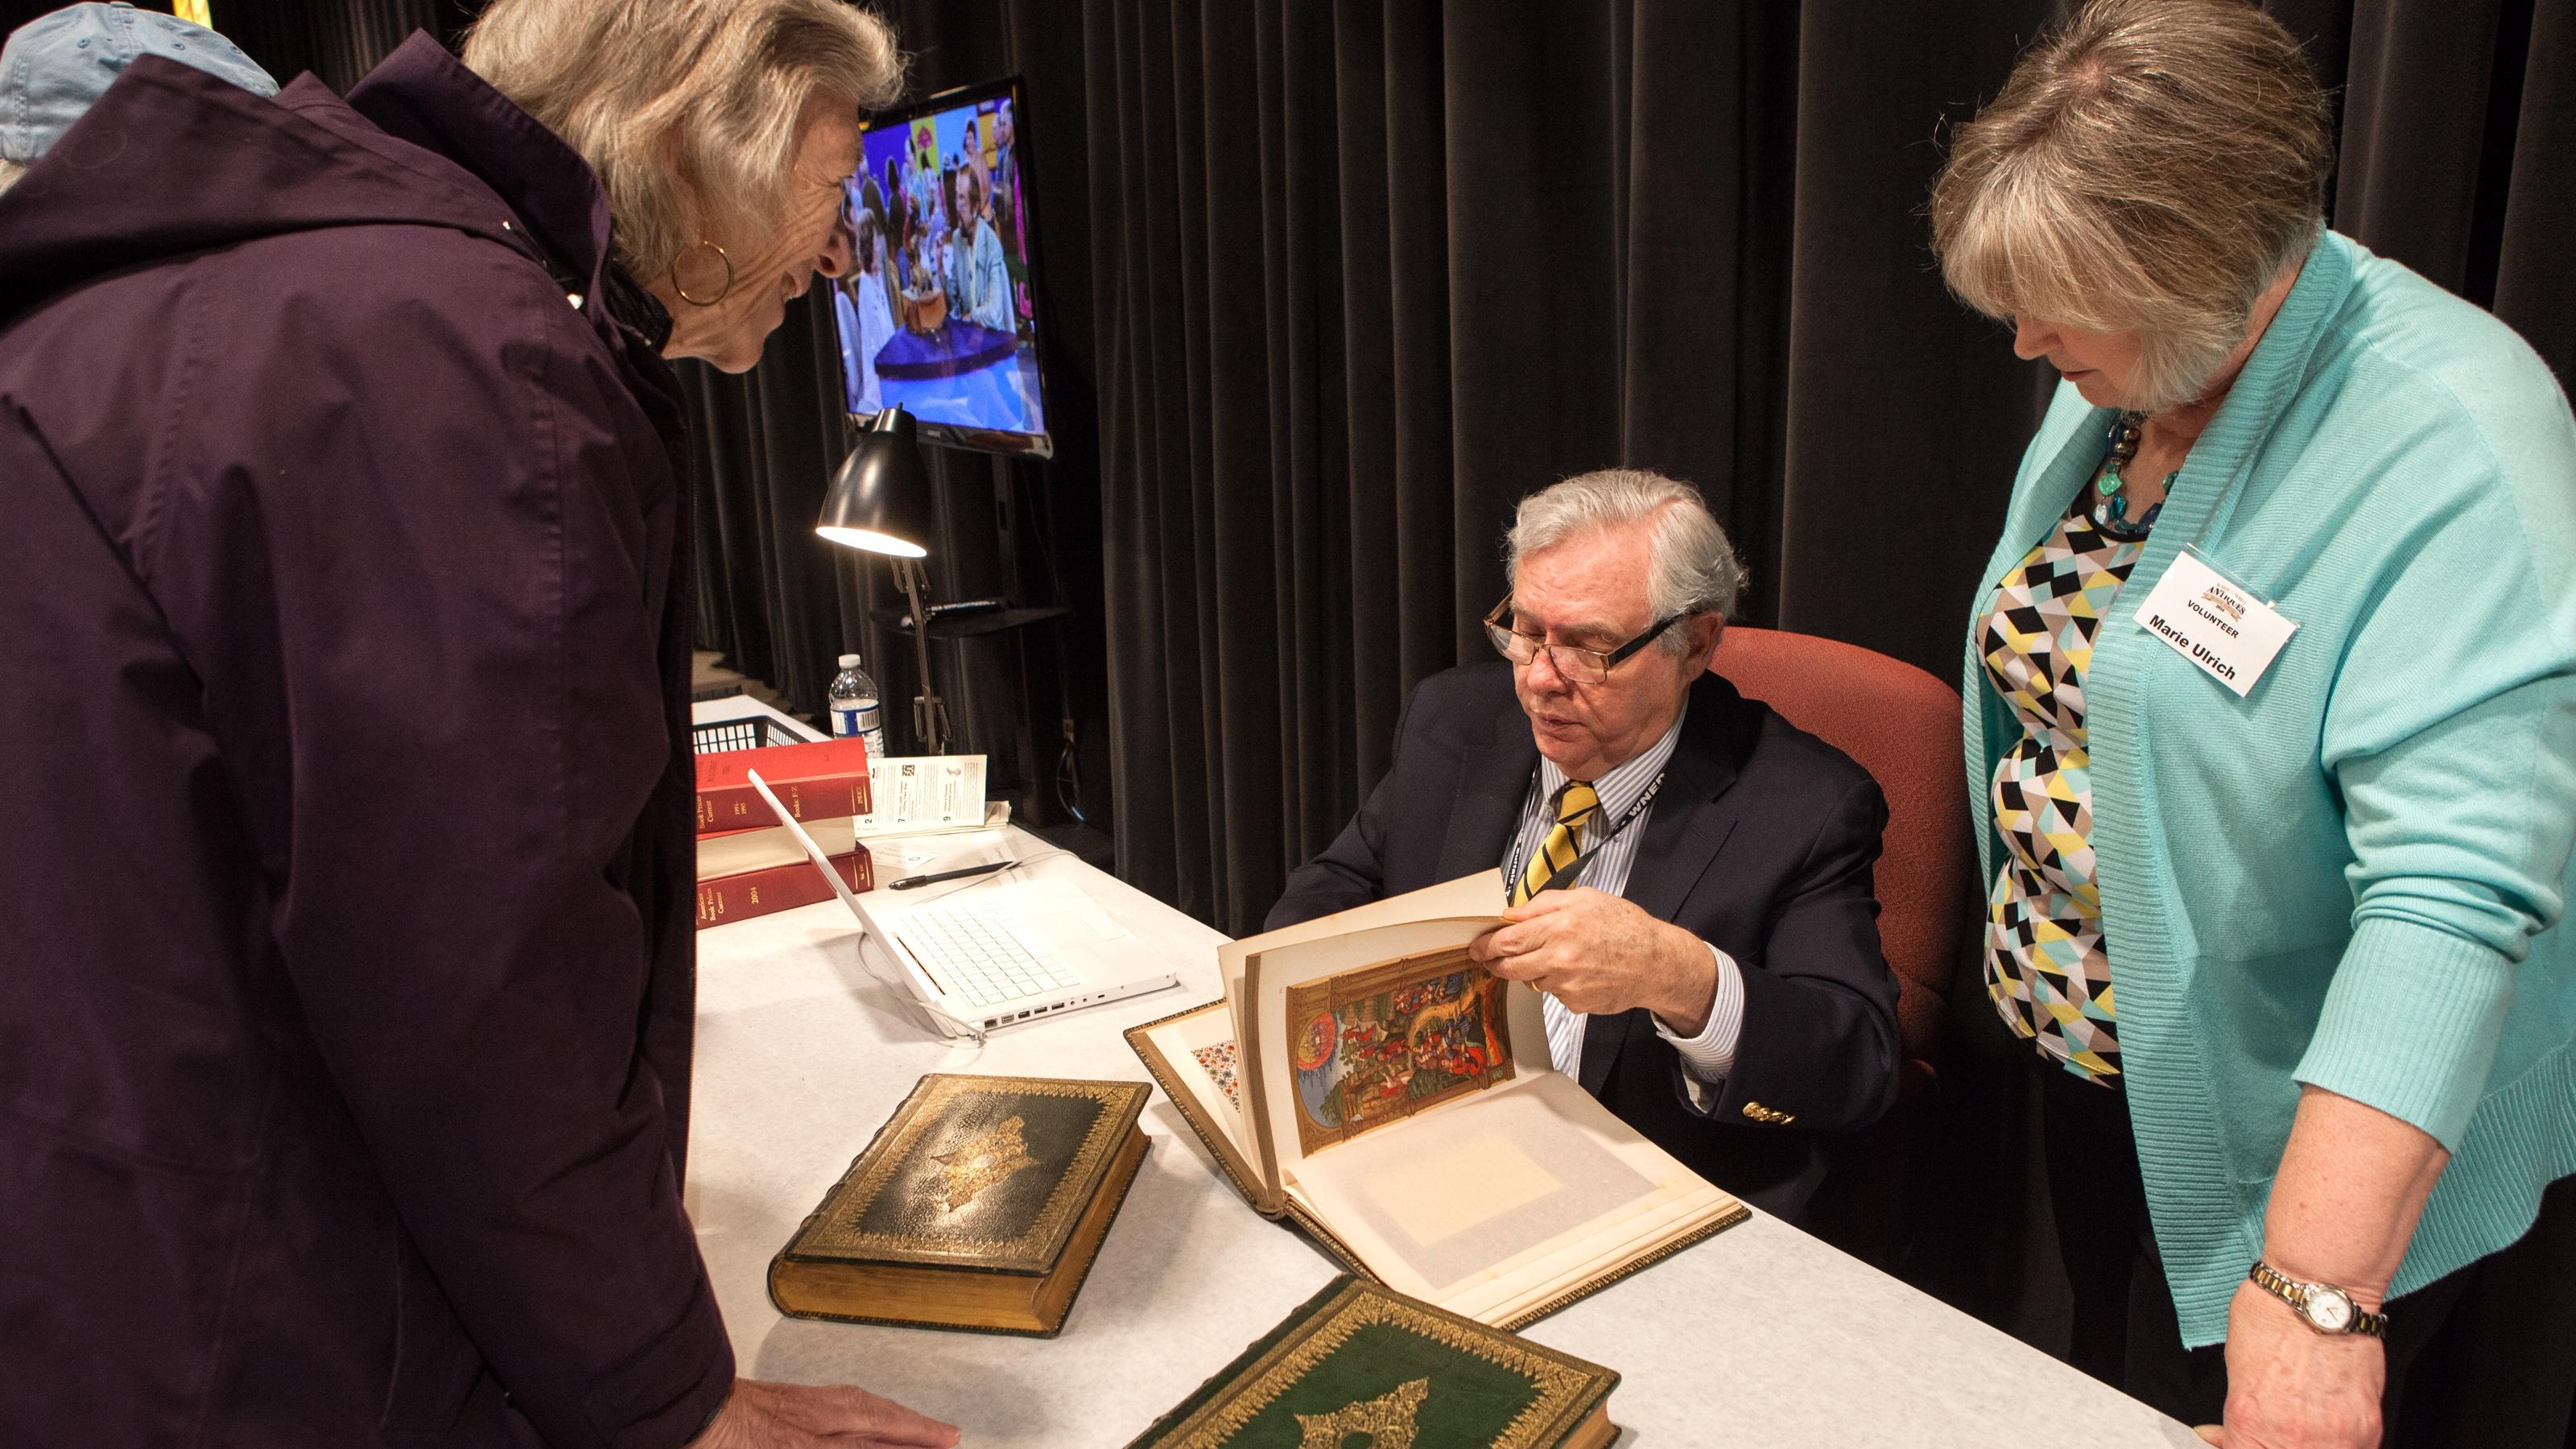 Book appraisal at the WNED | WBFO Antiques Home Show